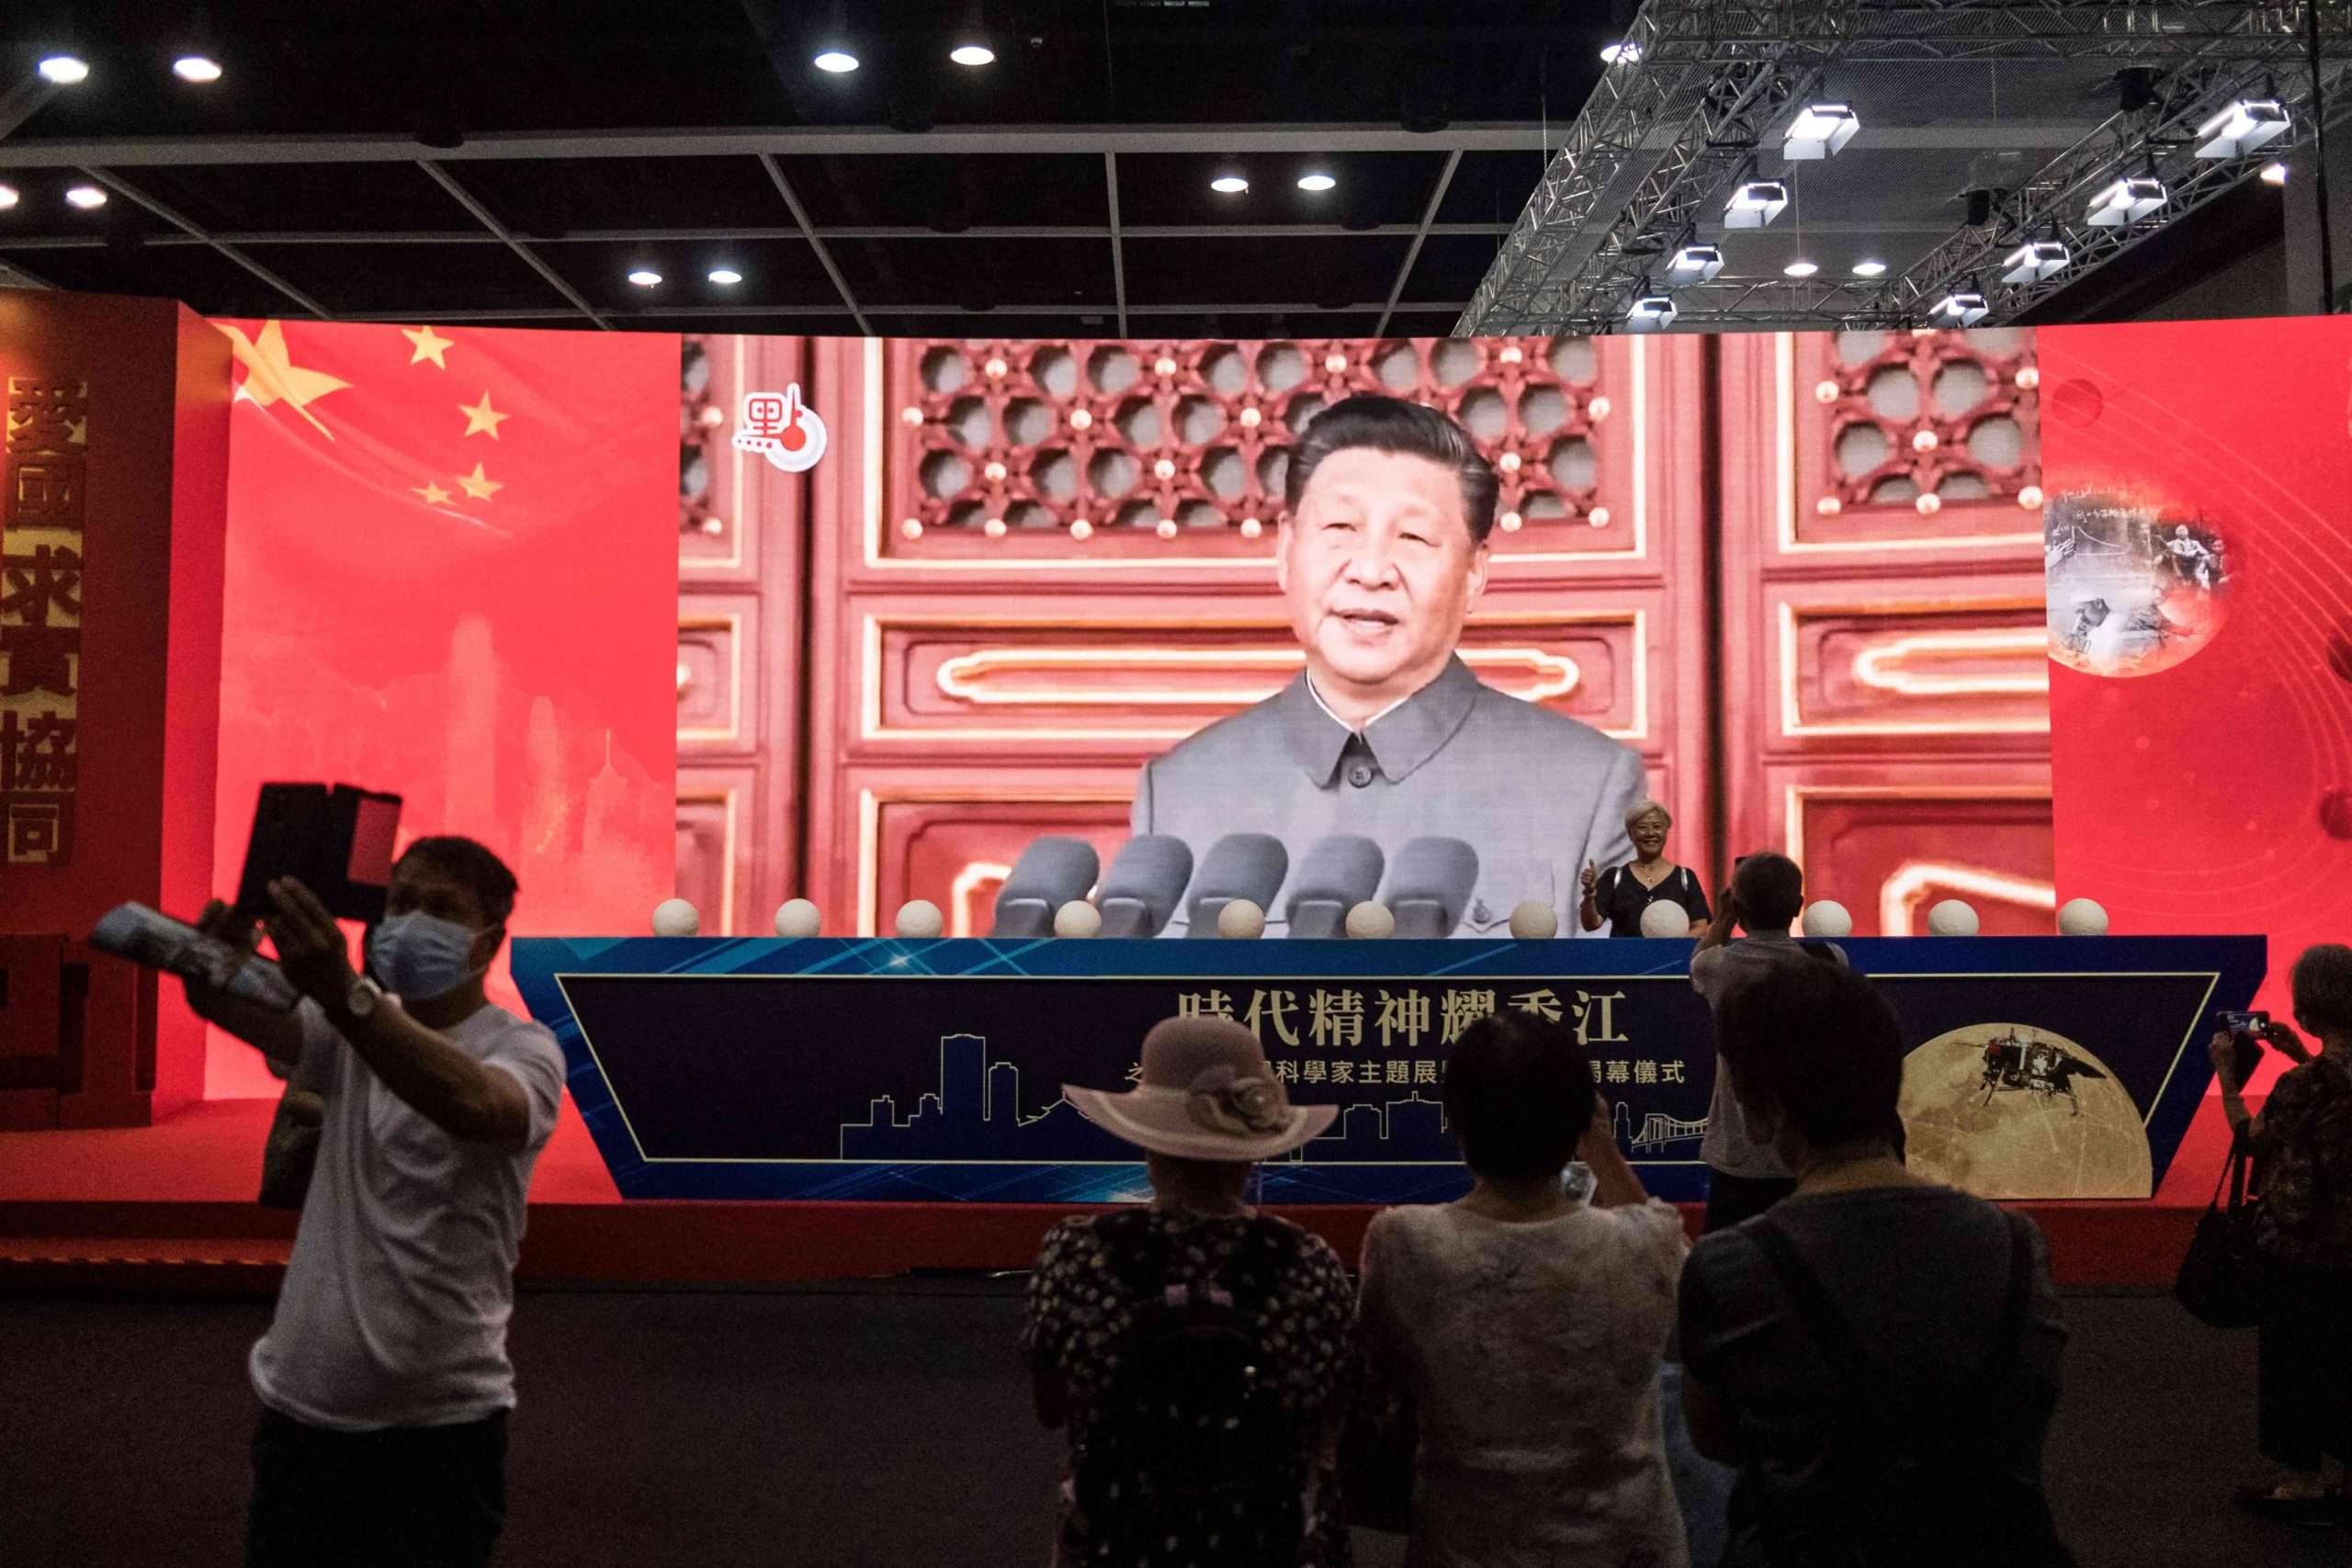 Opinion: As incomes rise, Xi will have to change his China model